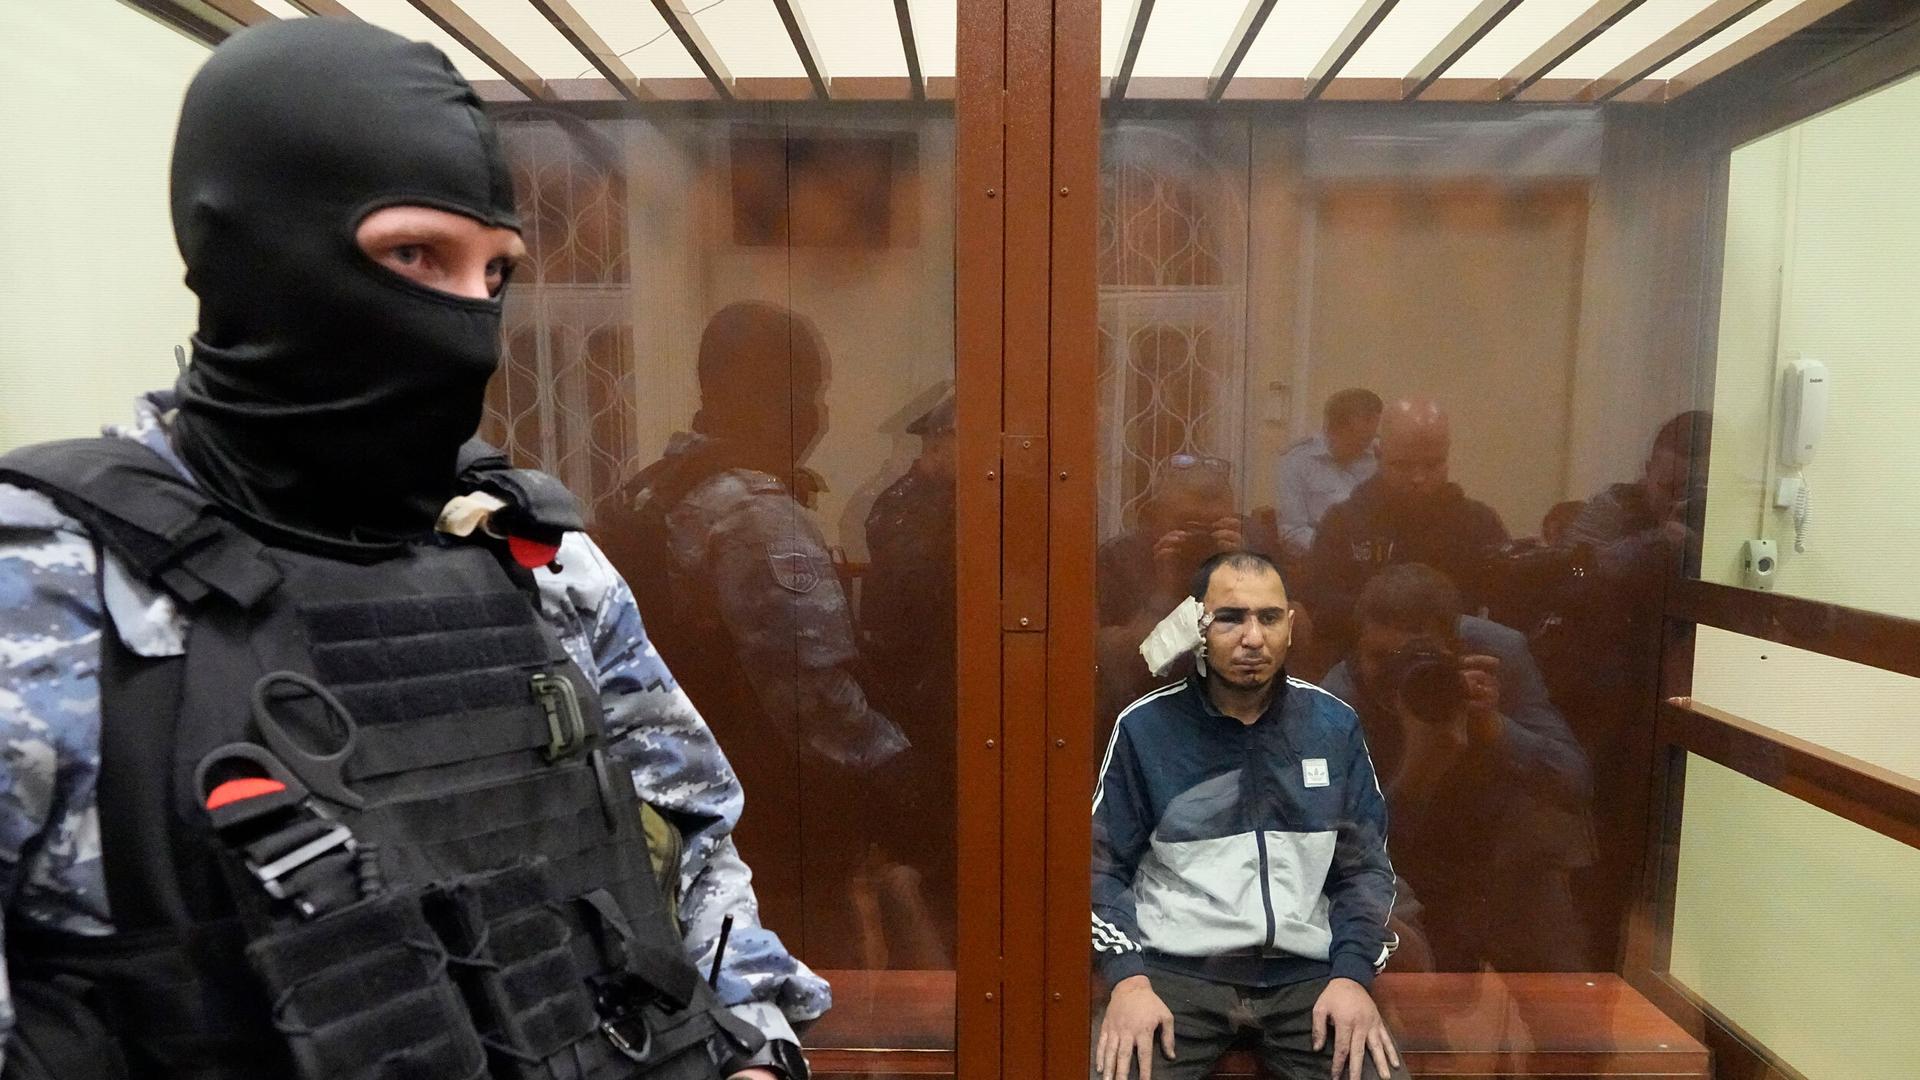 Saidakrami Murodali Rachabalizoda, a suspect in the Crocus City Hall shooting, sits in a defendants’ cage in Basmanny District Court in Moscow, Russia, on March 24, 2024.